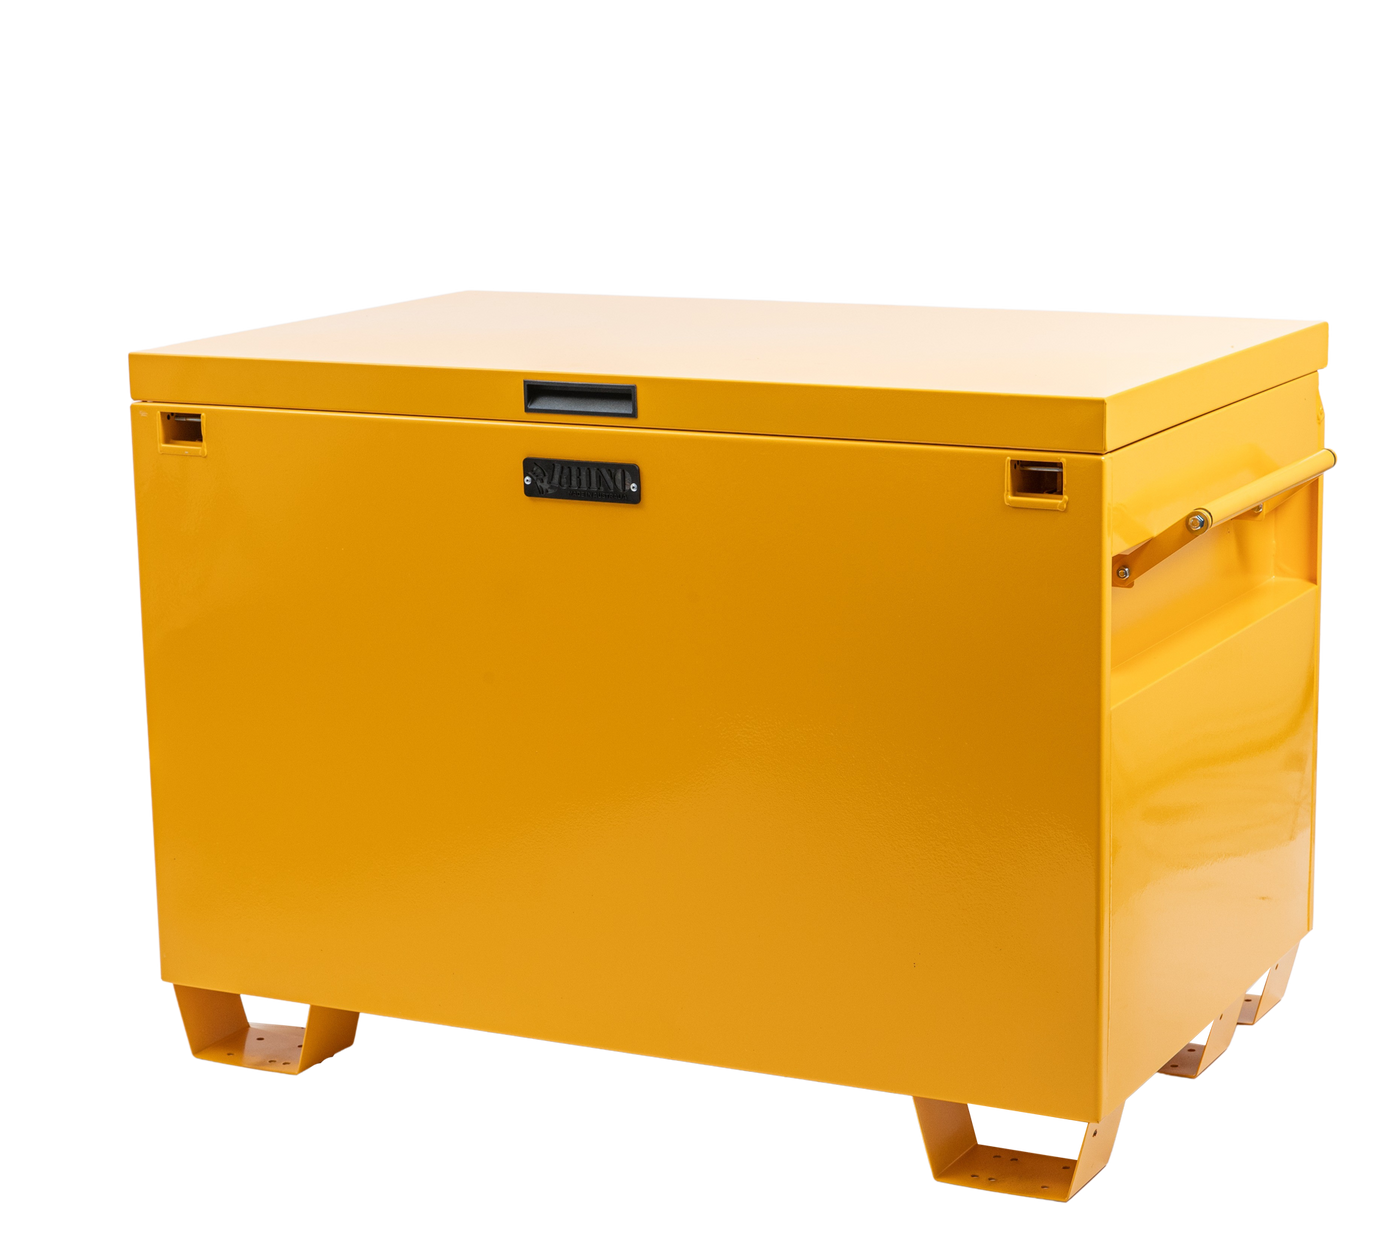 Large Yellow Powder Coated Site Box with Theft Protect Lock Box Isometric View